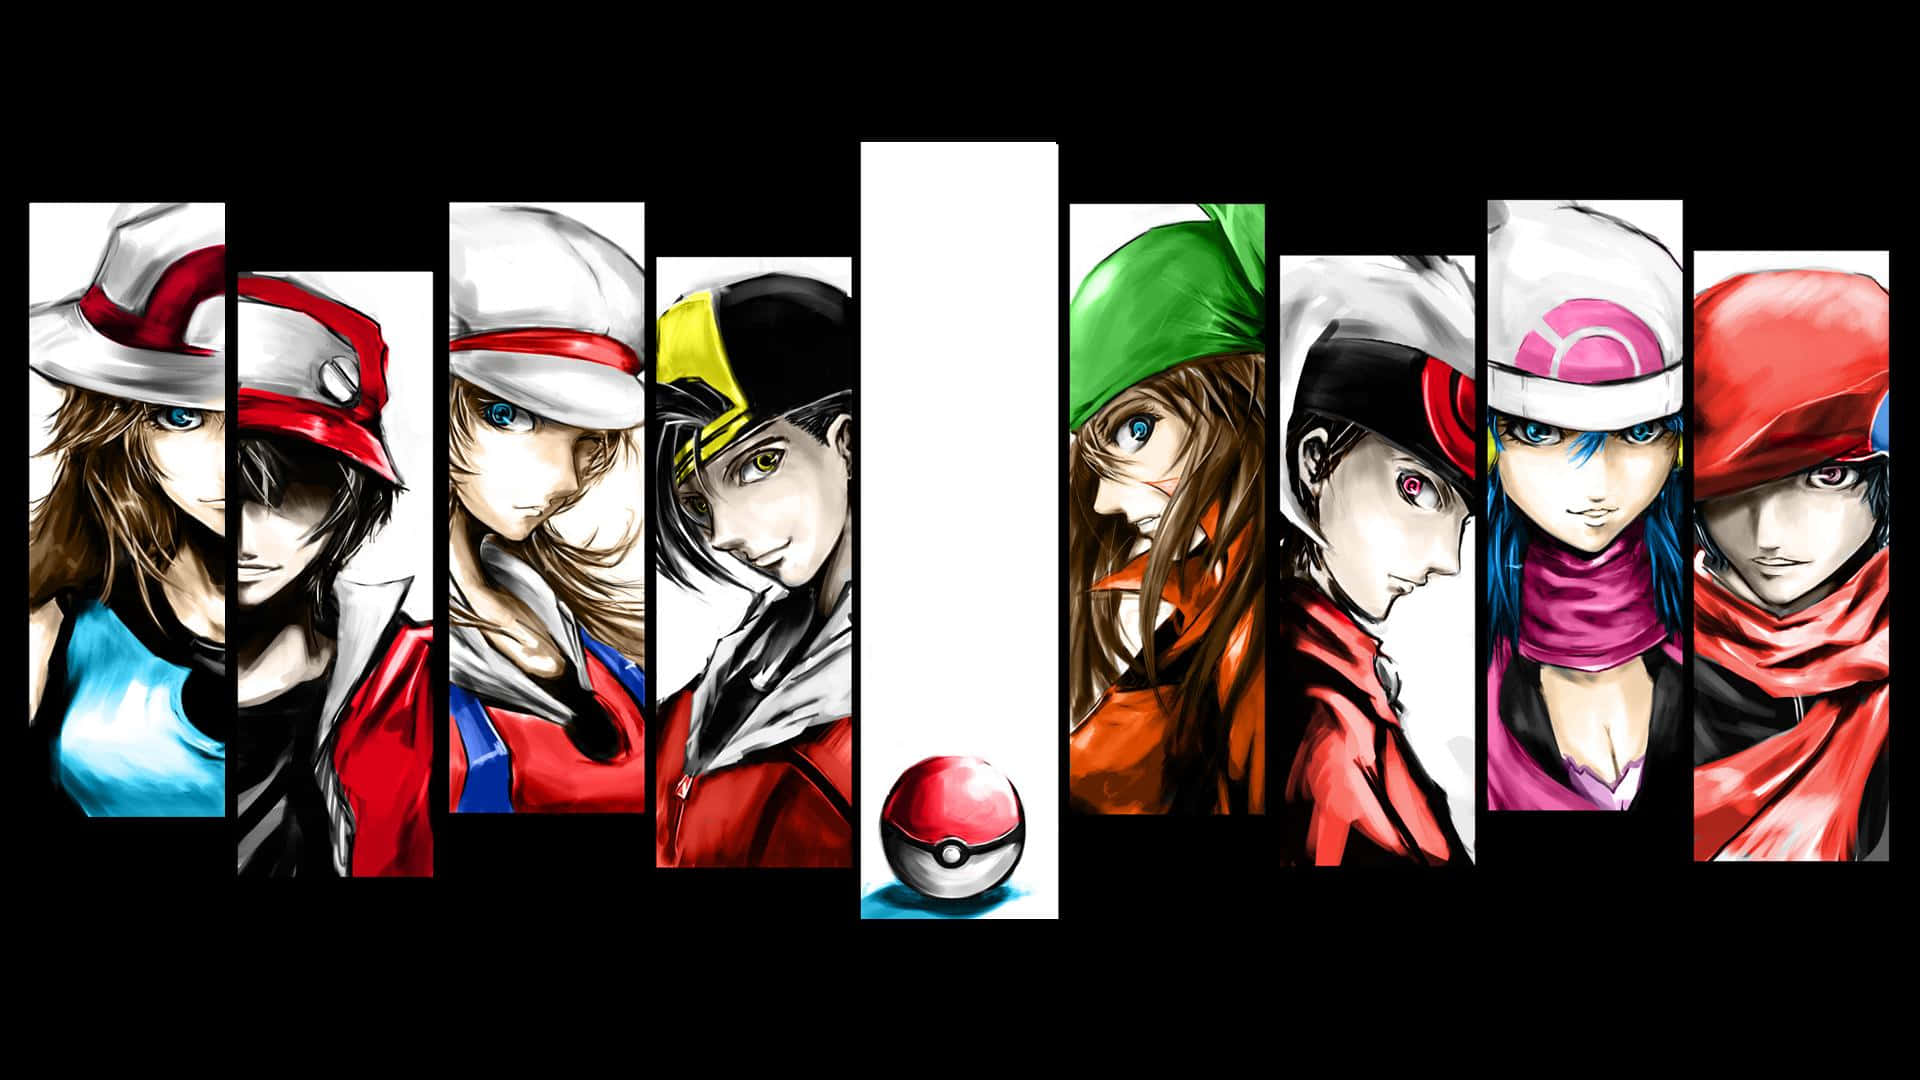 Go forth and become the Pokemon Master! Wallpaper